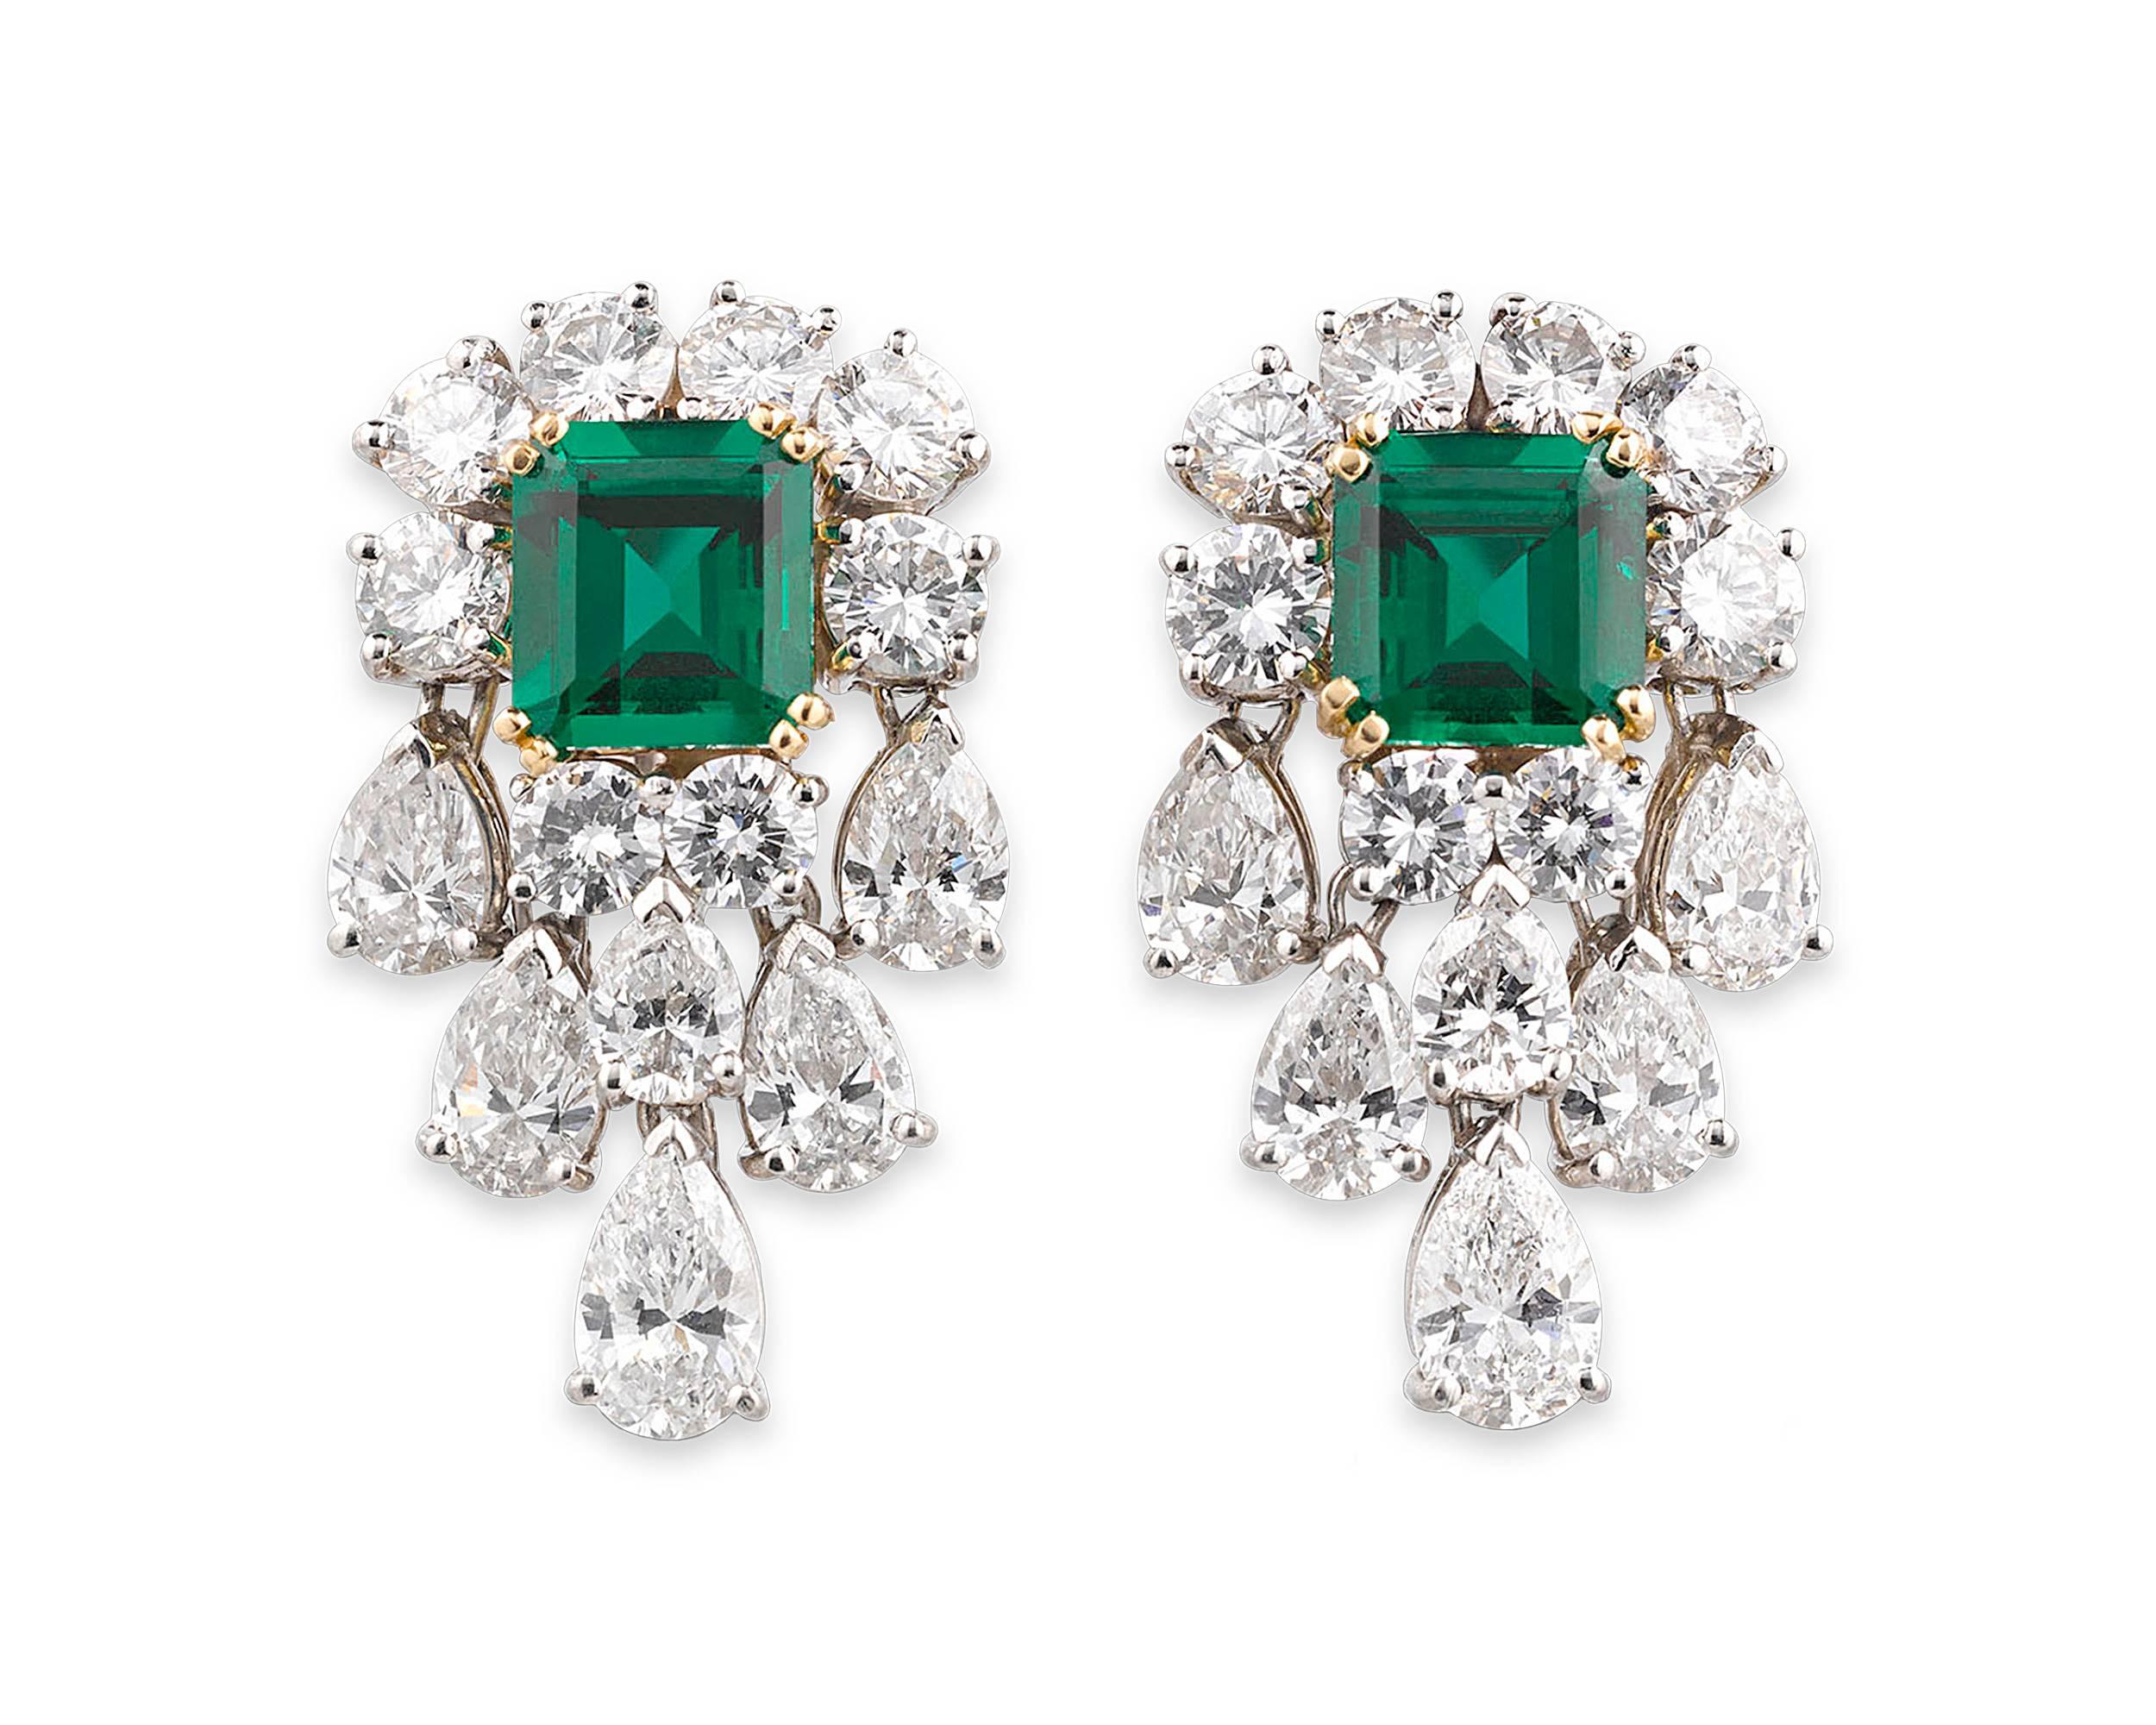 This stunning and dramatic pair of chandelier earrings encase two Old Mine emeralds of extraordinary color and clarity. Certified by the American Gemological Laboratories as being no oil and untreated, the stunning duo total 3.12 carats and claim an